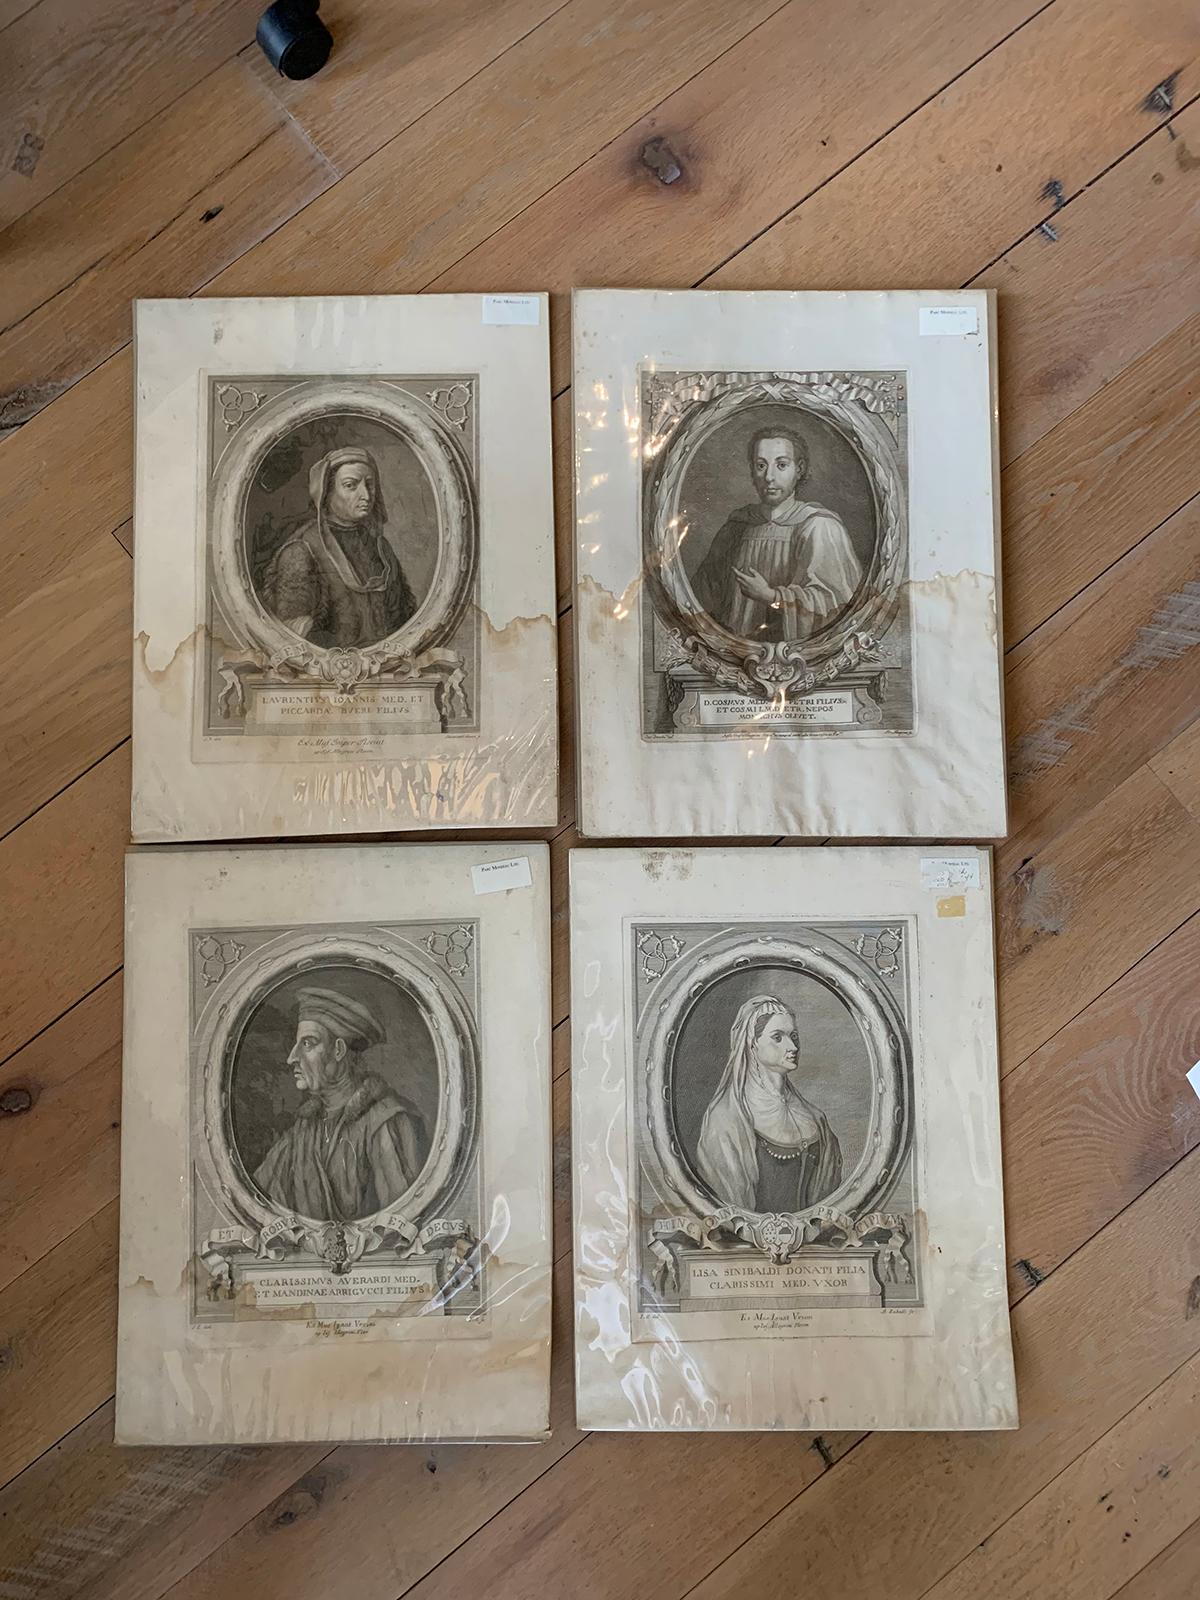 Set of four late 18th century Italian Florentine portrait prints published by Guiseppe Allegrini, after original engravings by Francesco Allegrini.